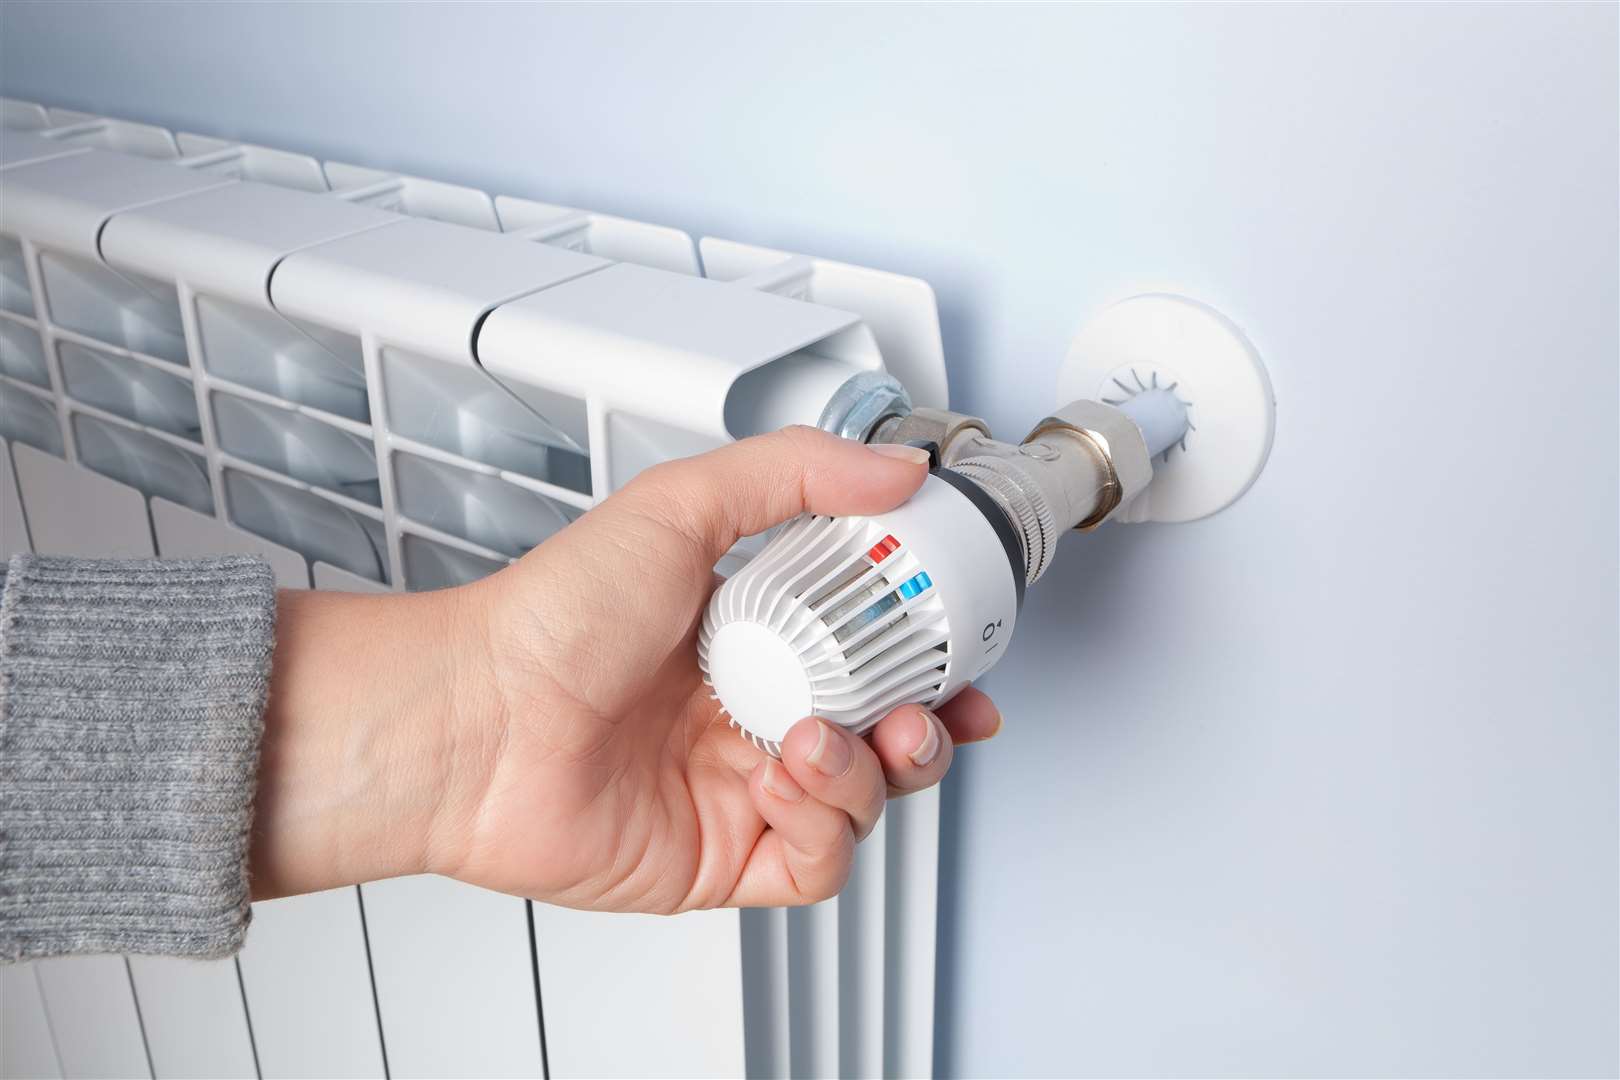 Thousands of households face struggling to pay for enough heating this winter.